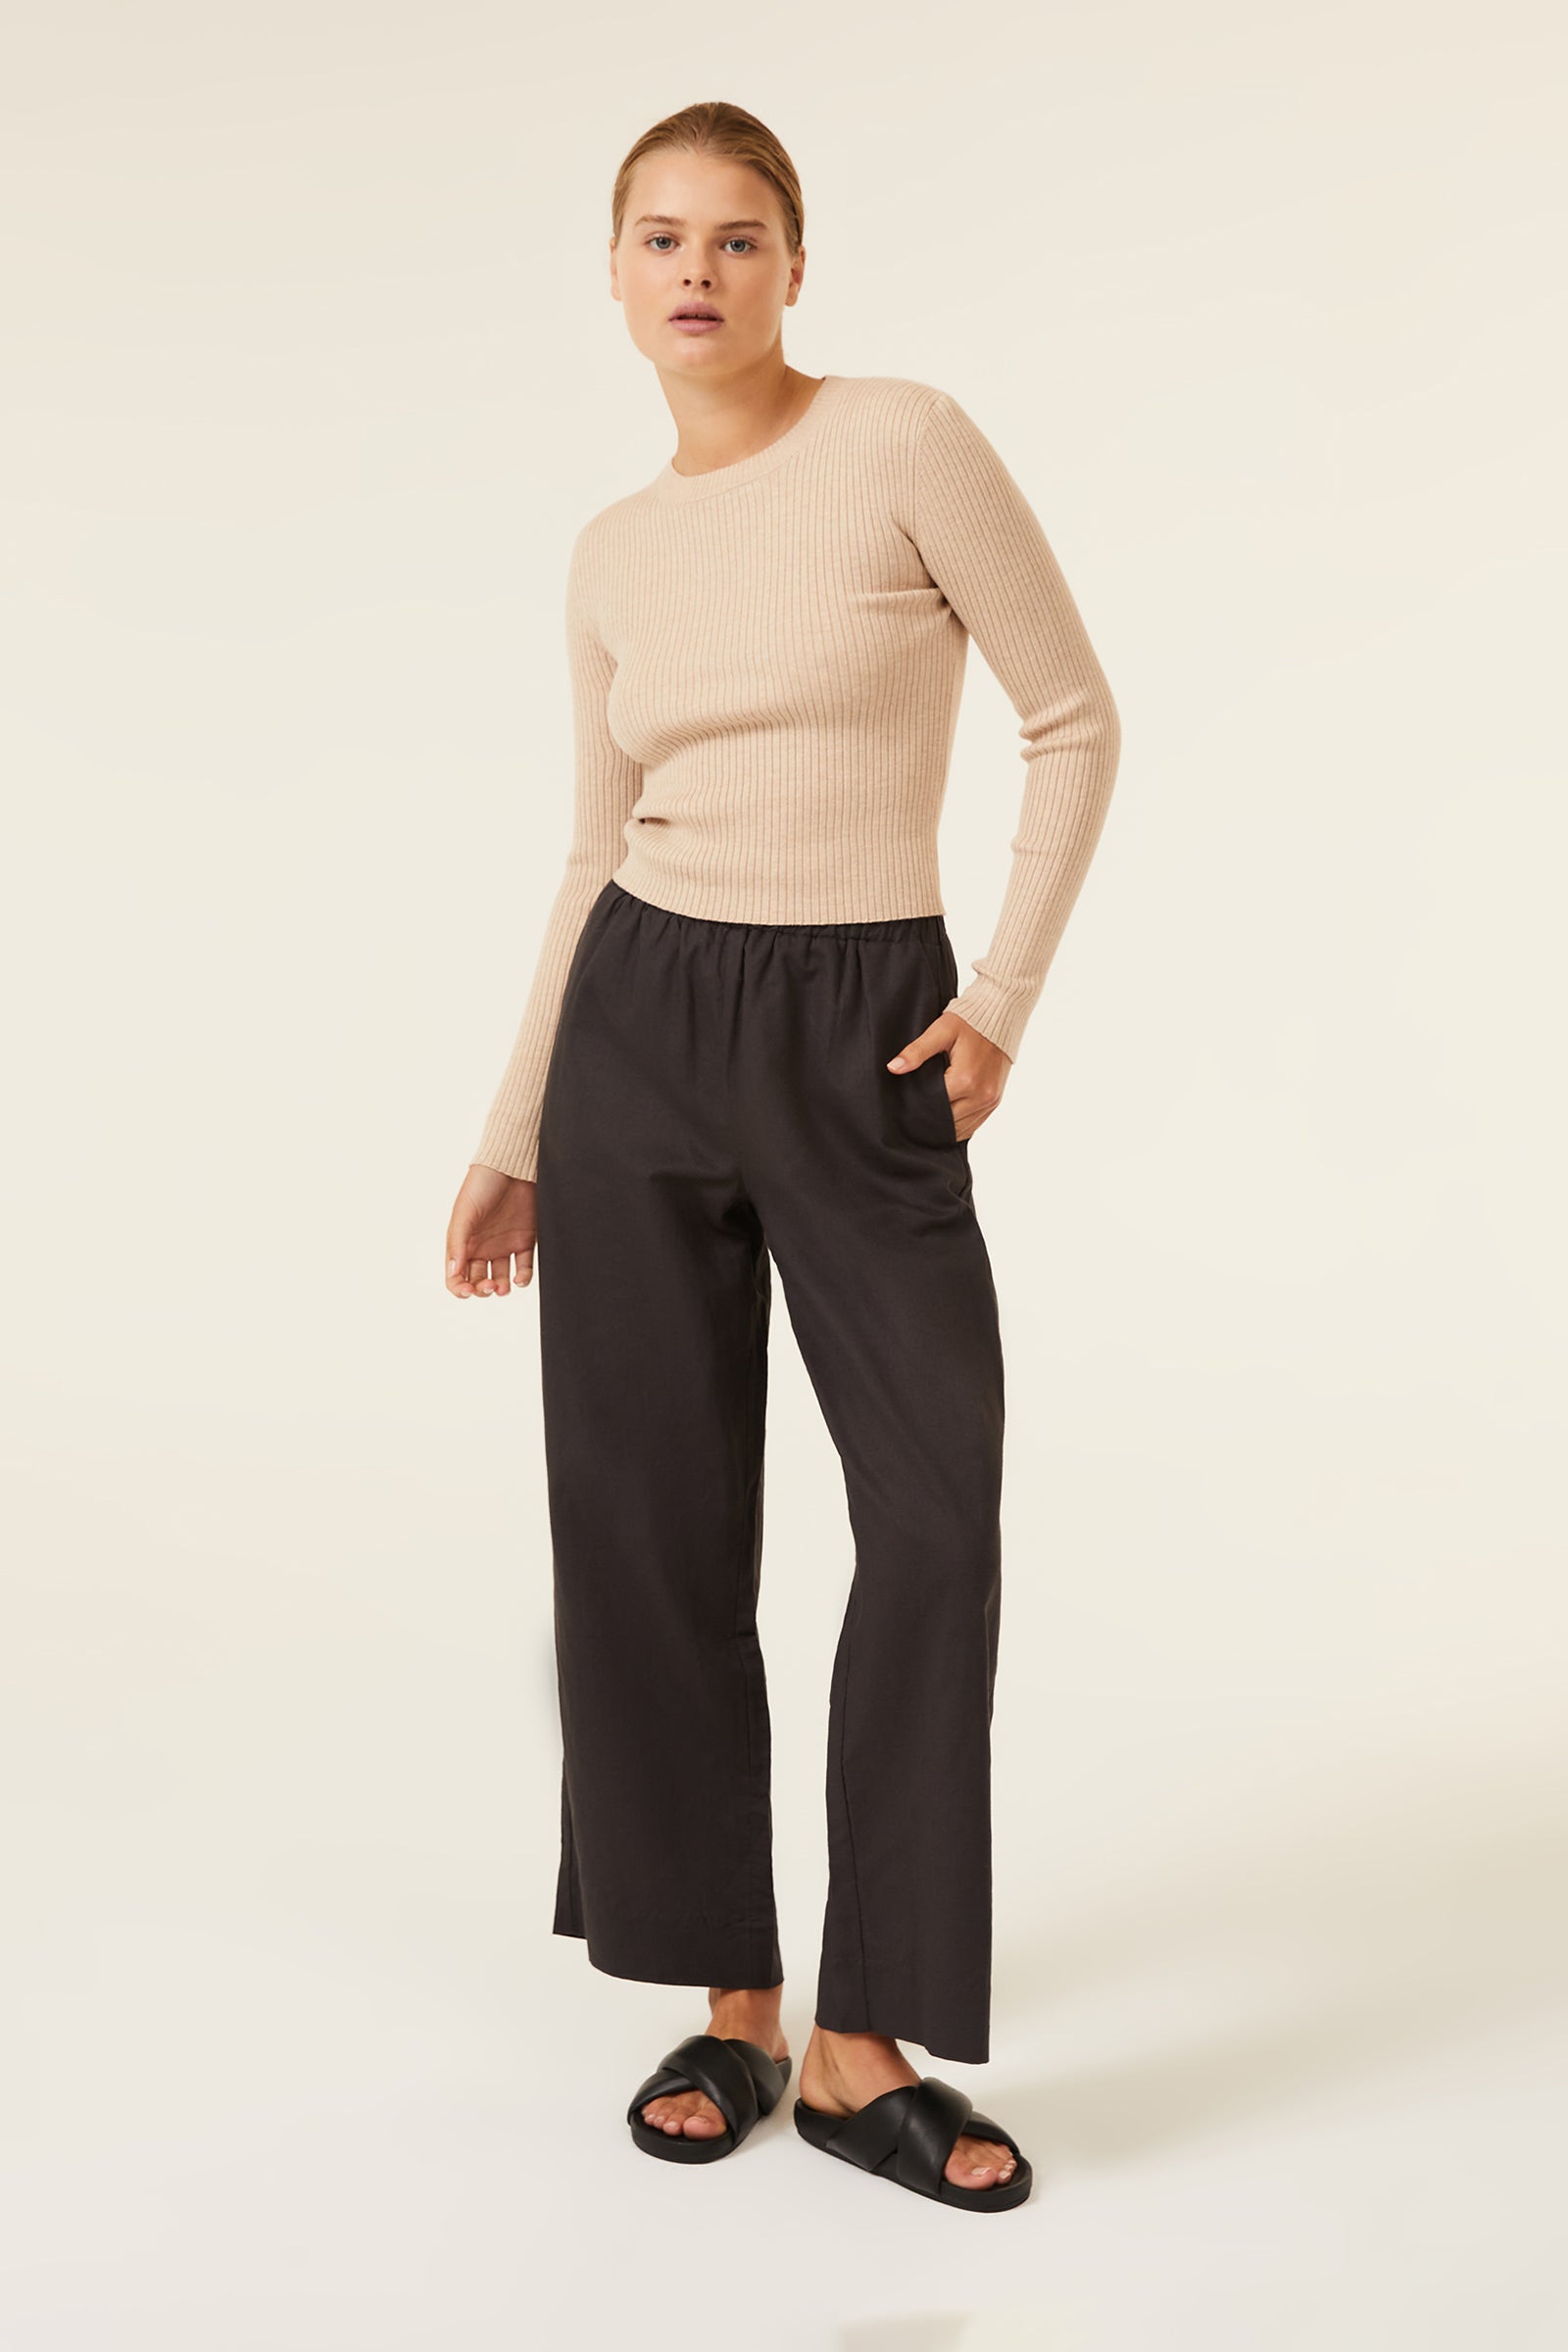 Nude Lucy Nude Classic Knit Oatmeal  